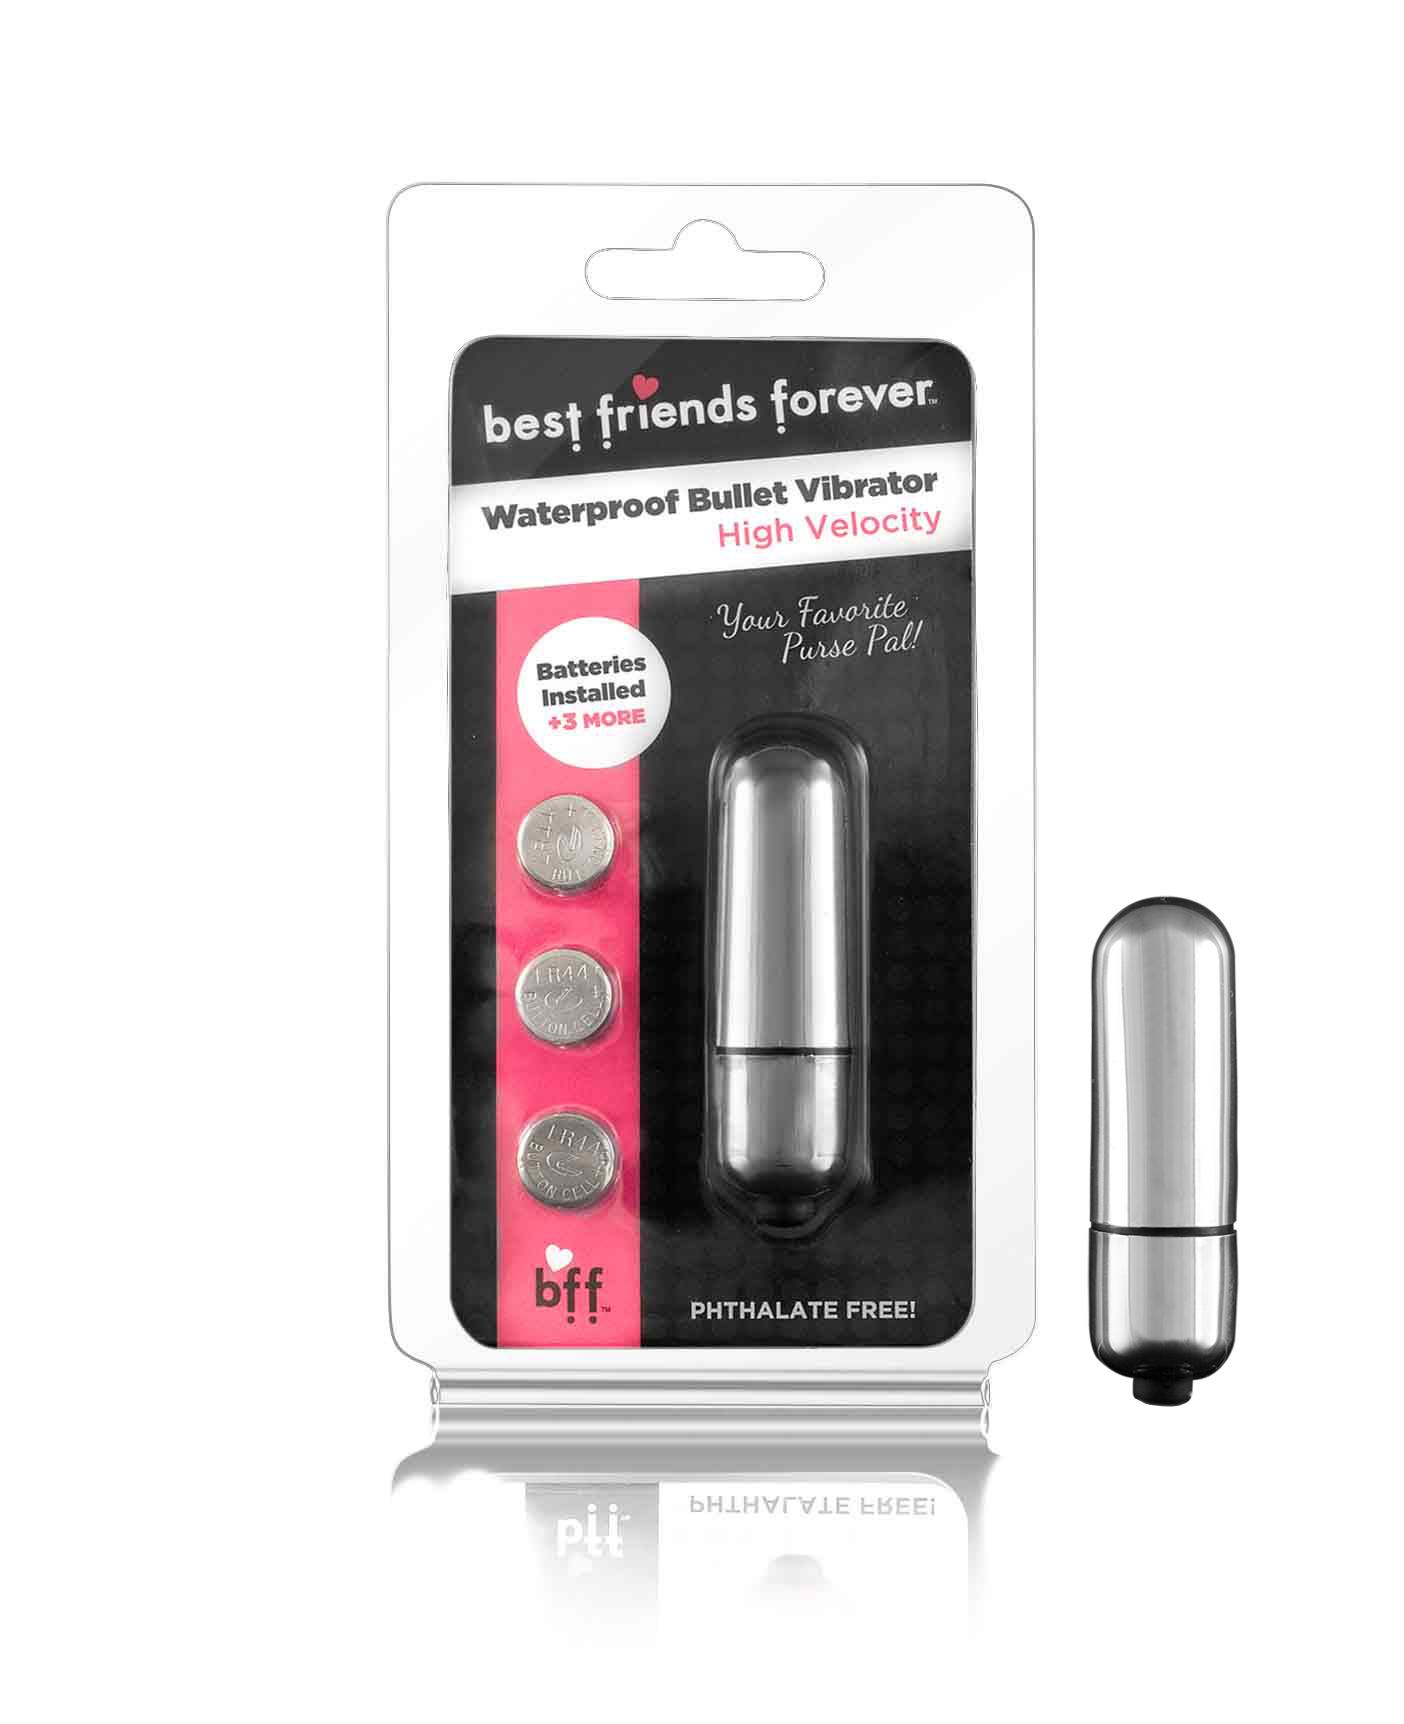 SI IGNITE BFF Bullet with Vibration, Waterproof, 7 cm, Silver